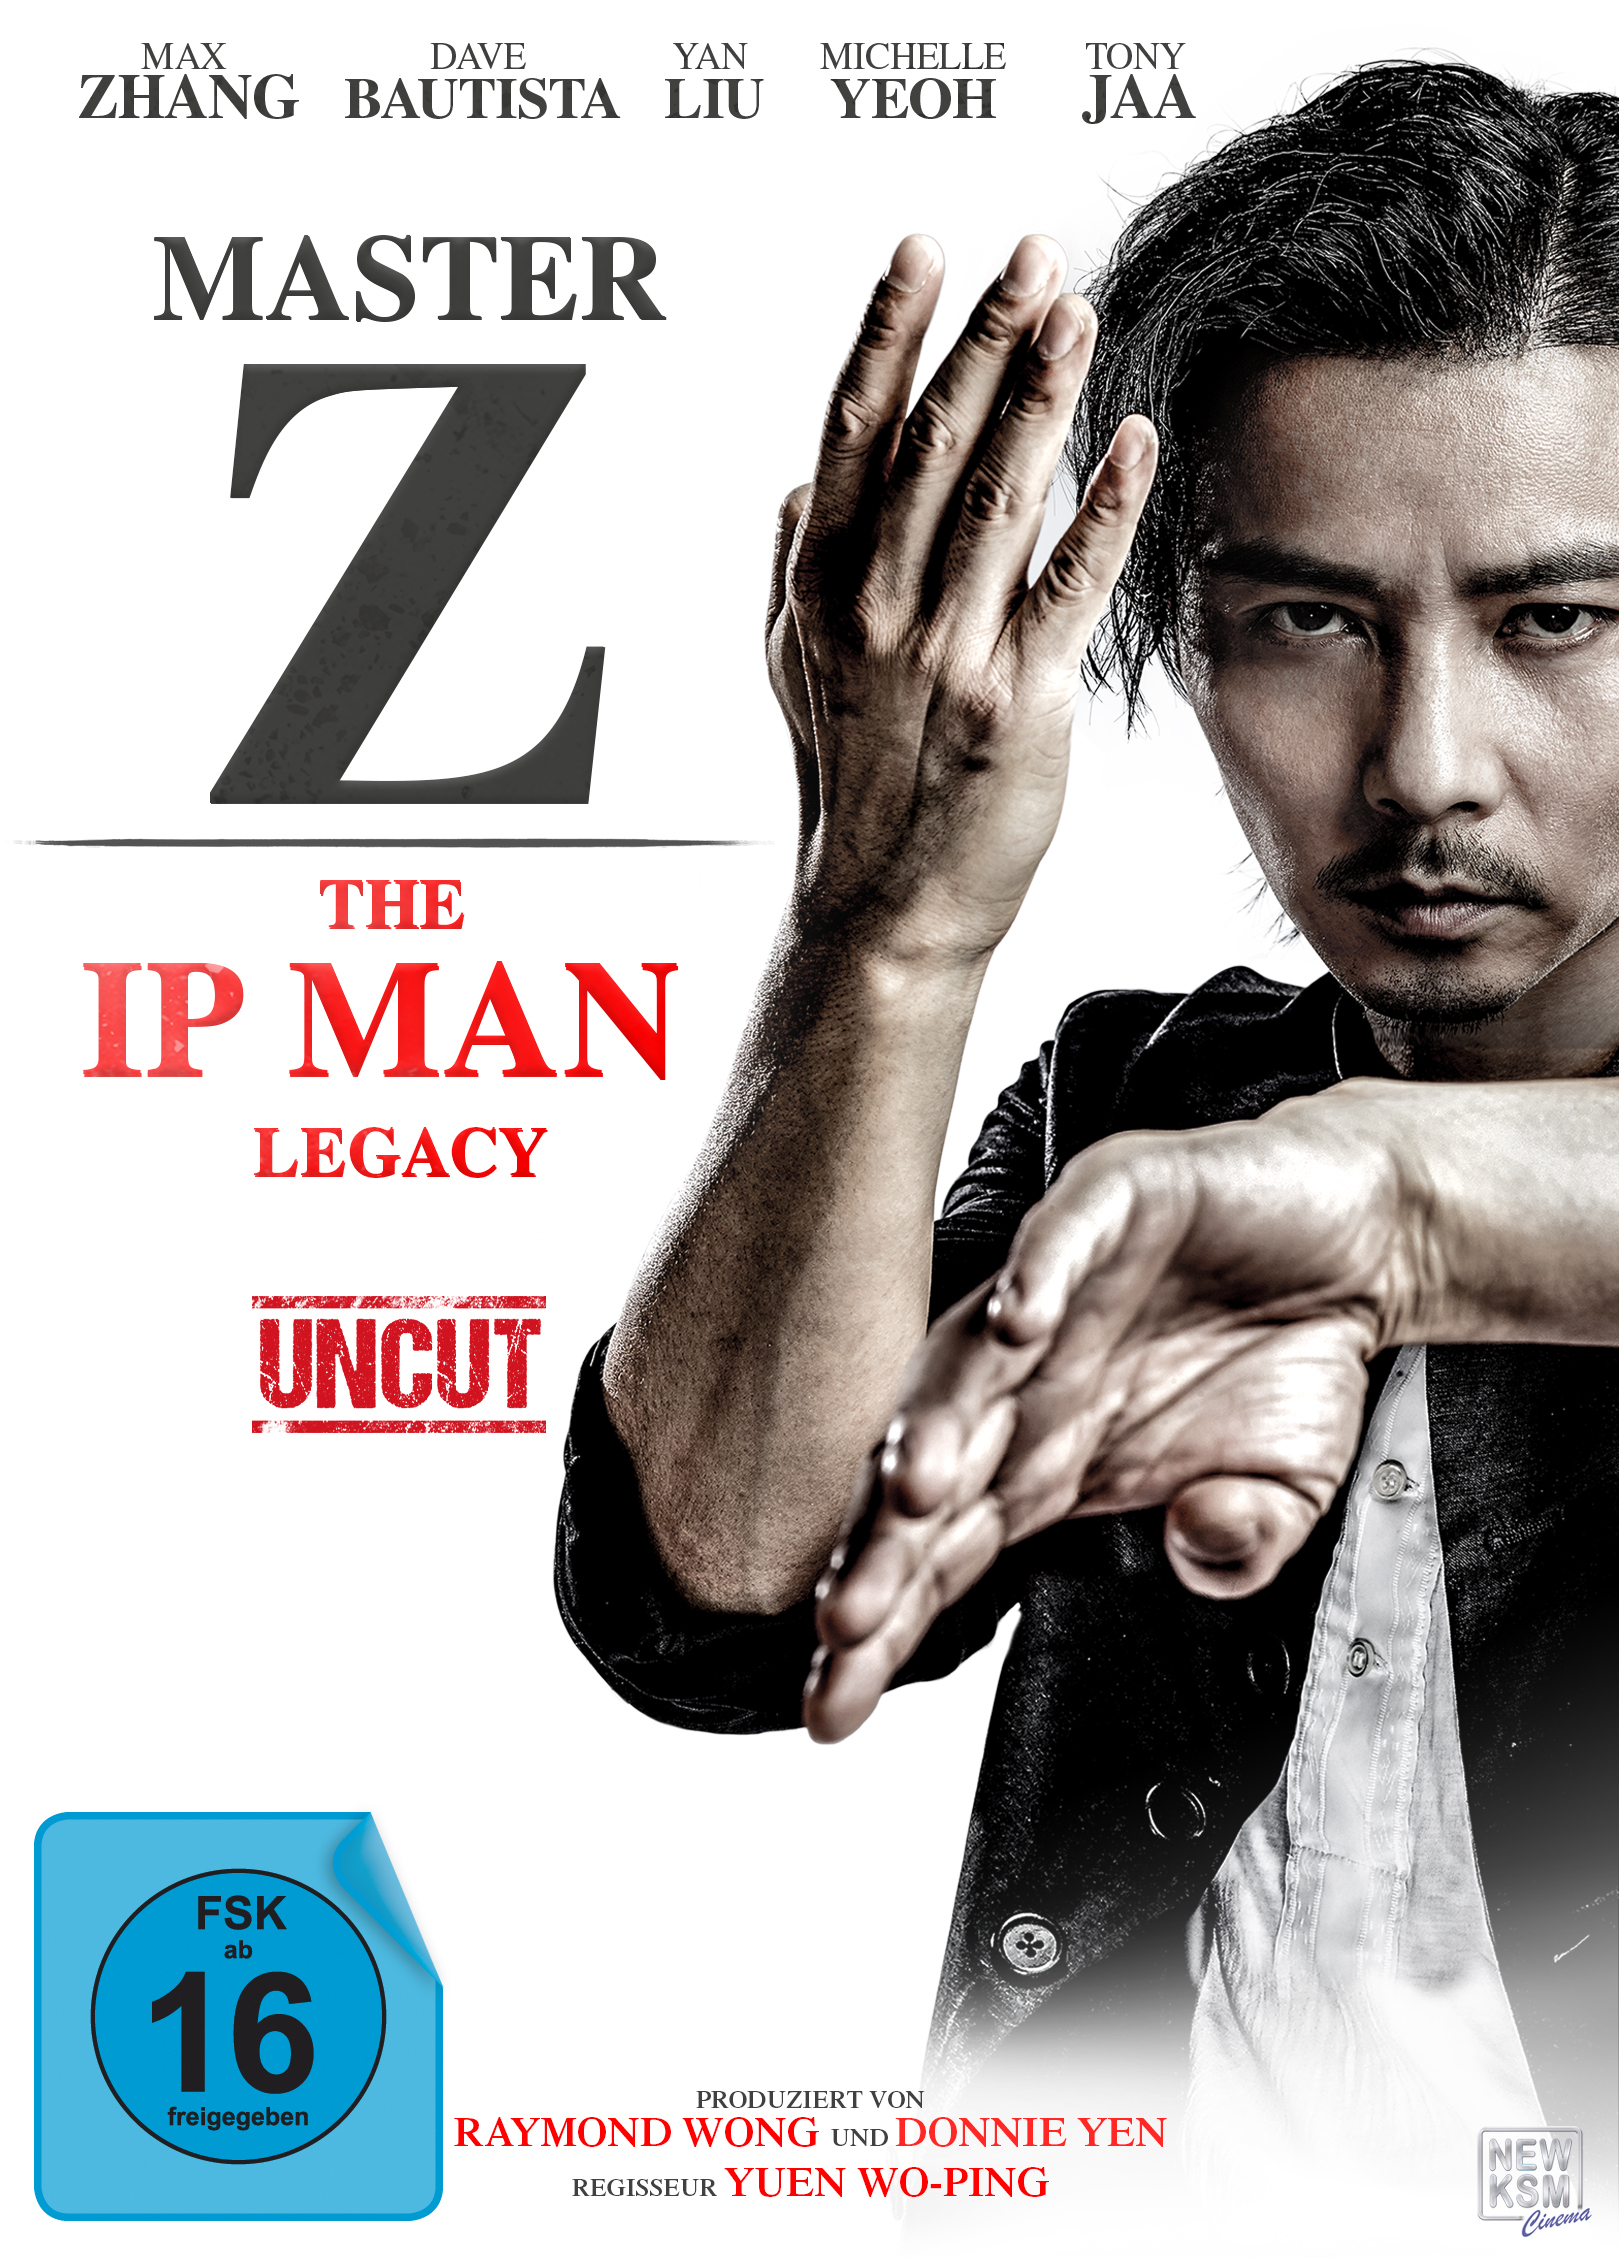 Master Z - The Ip Man Legacy (DVD) Cover